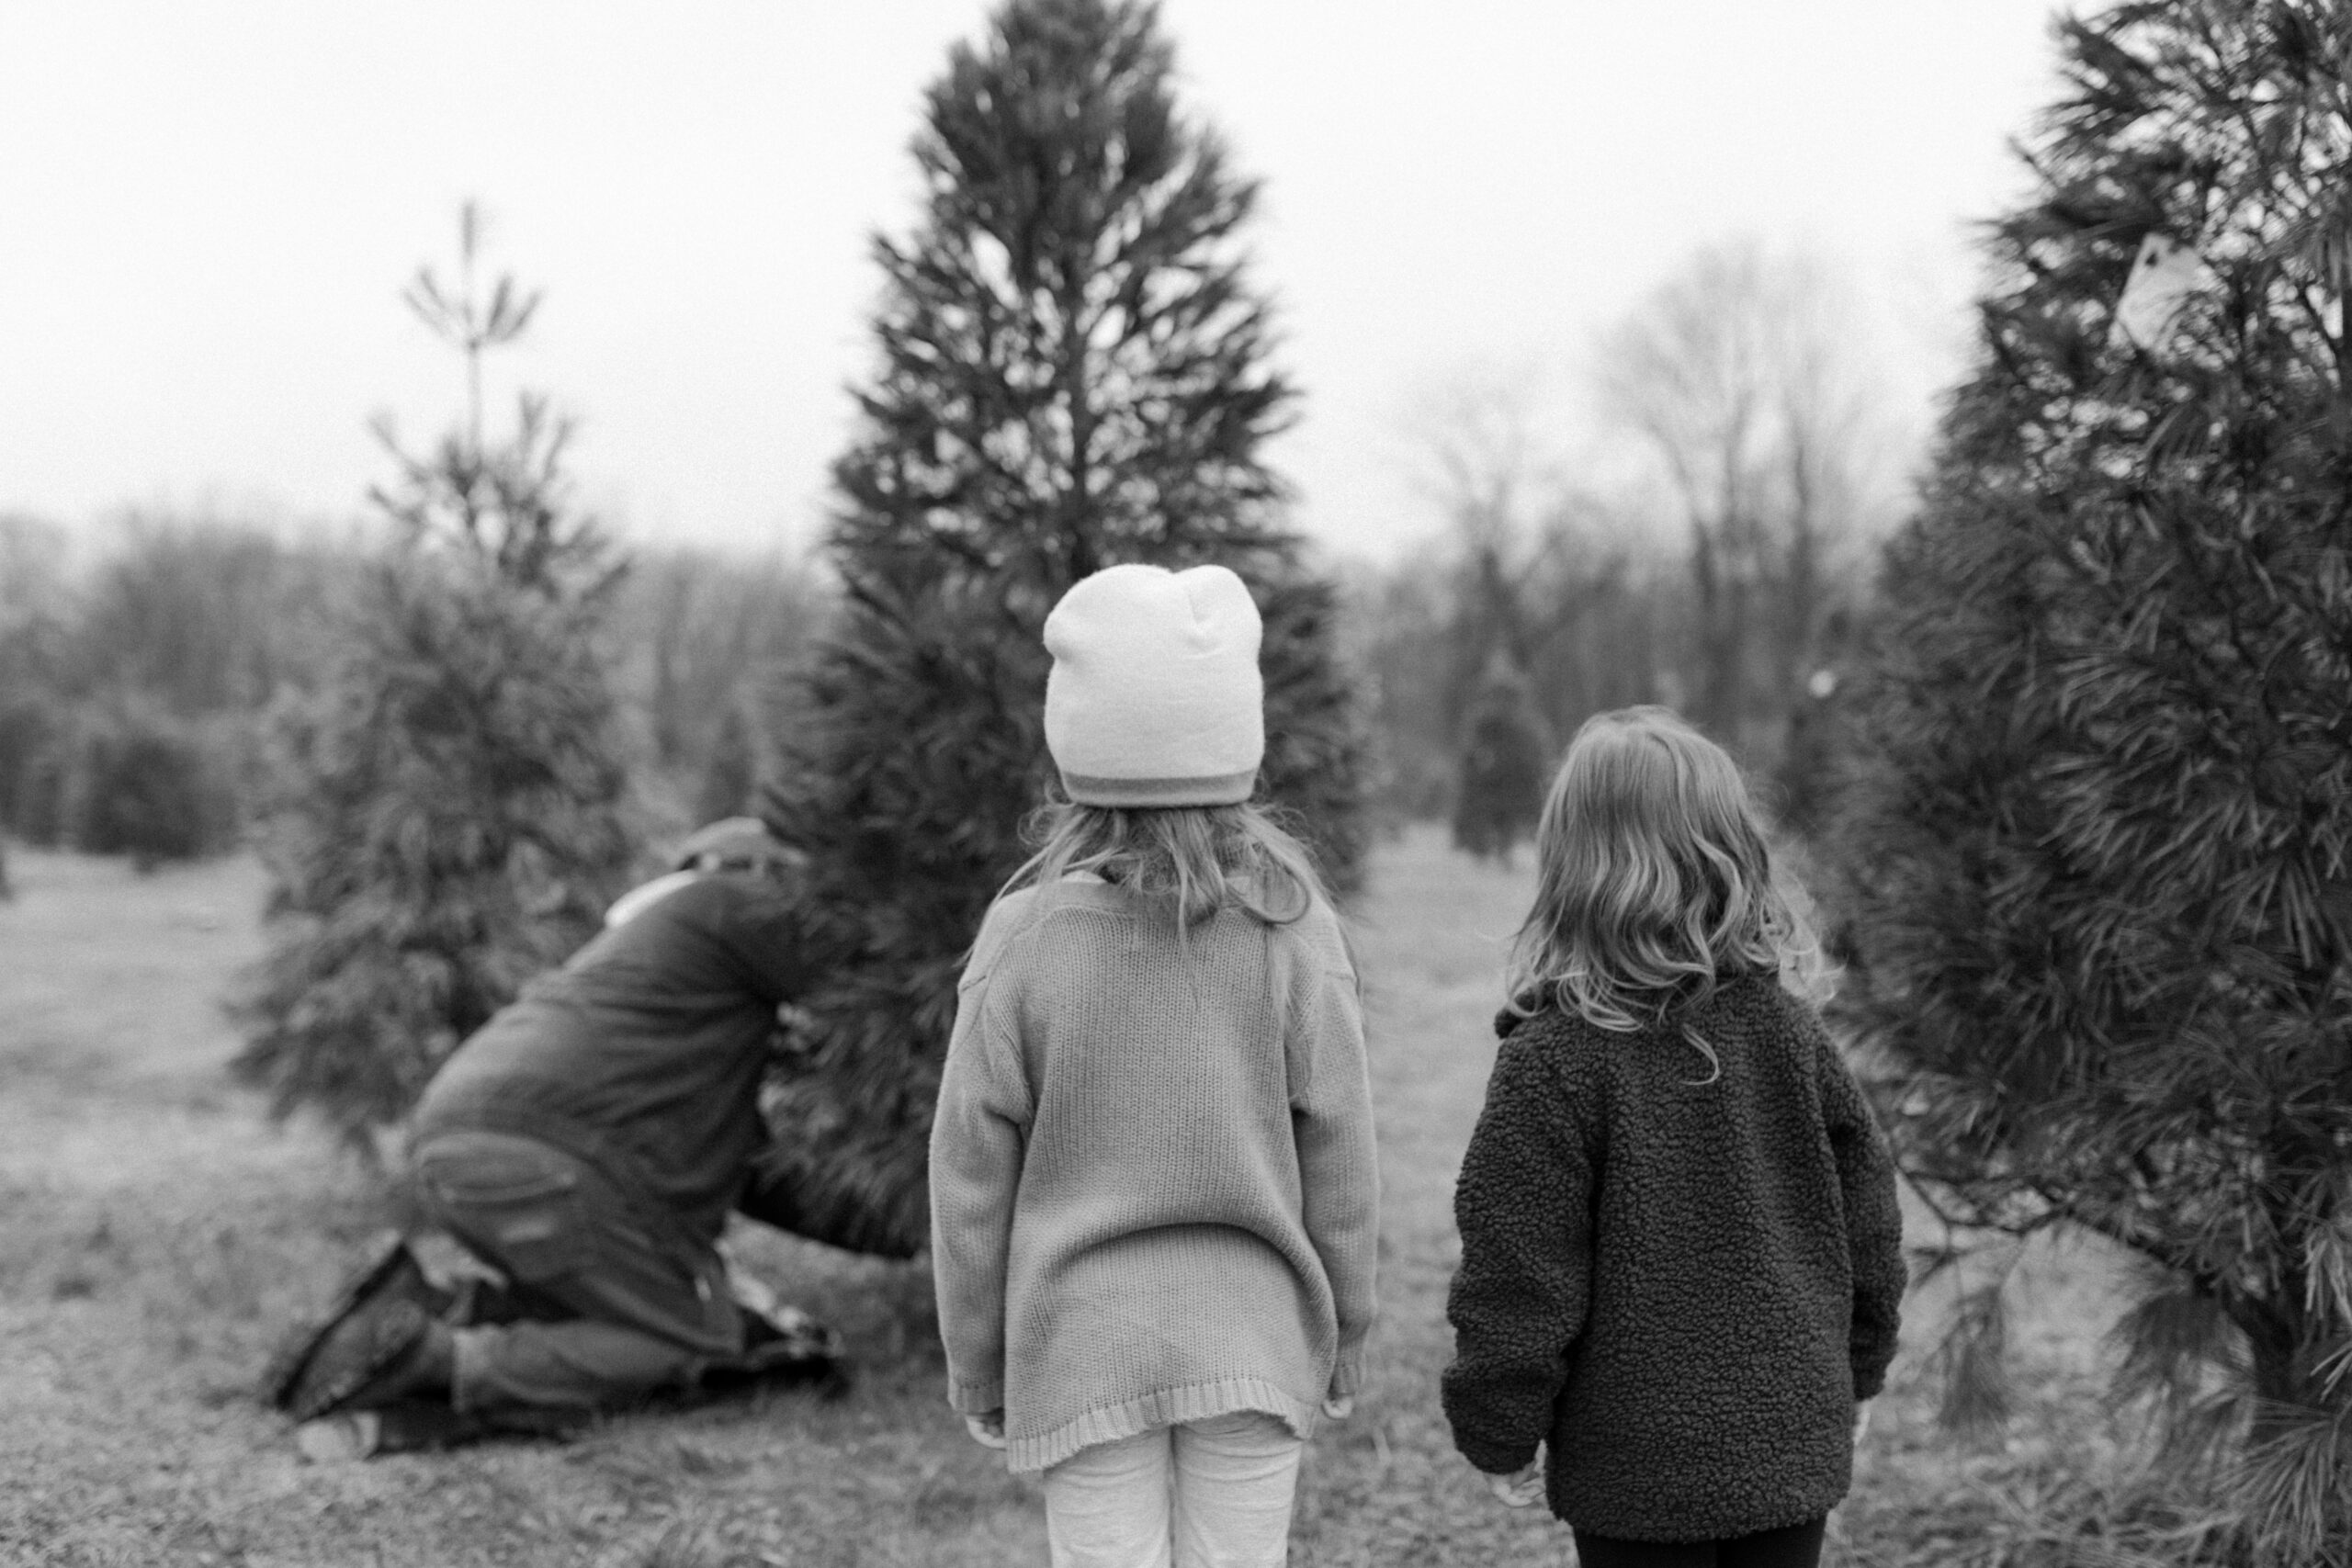 Two young girl watching Christmas tree be cut down with backs to camera.